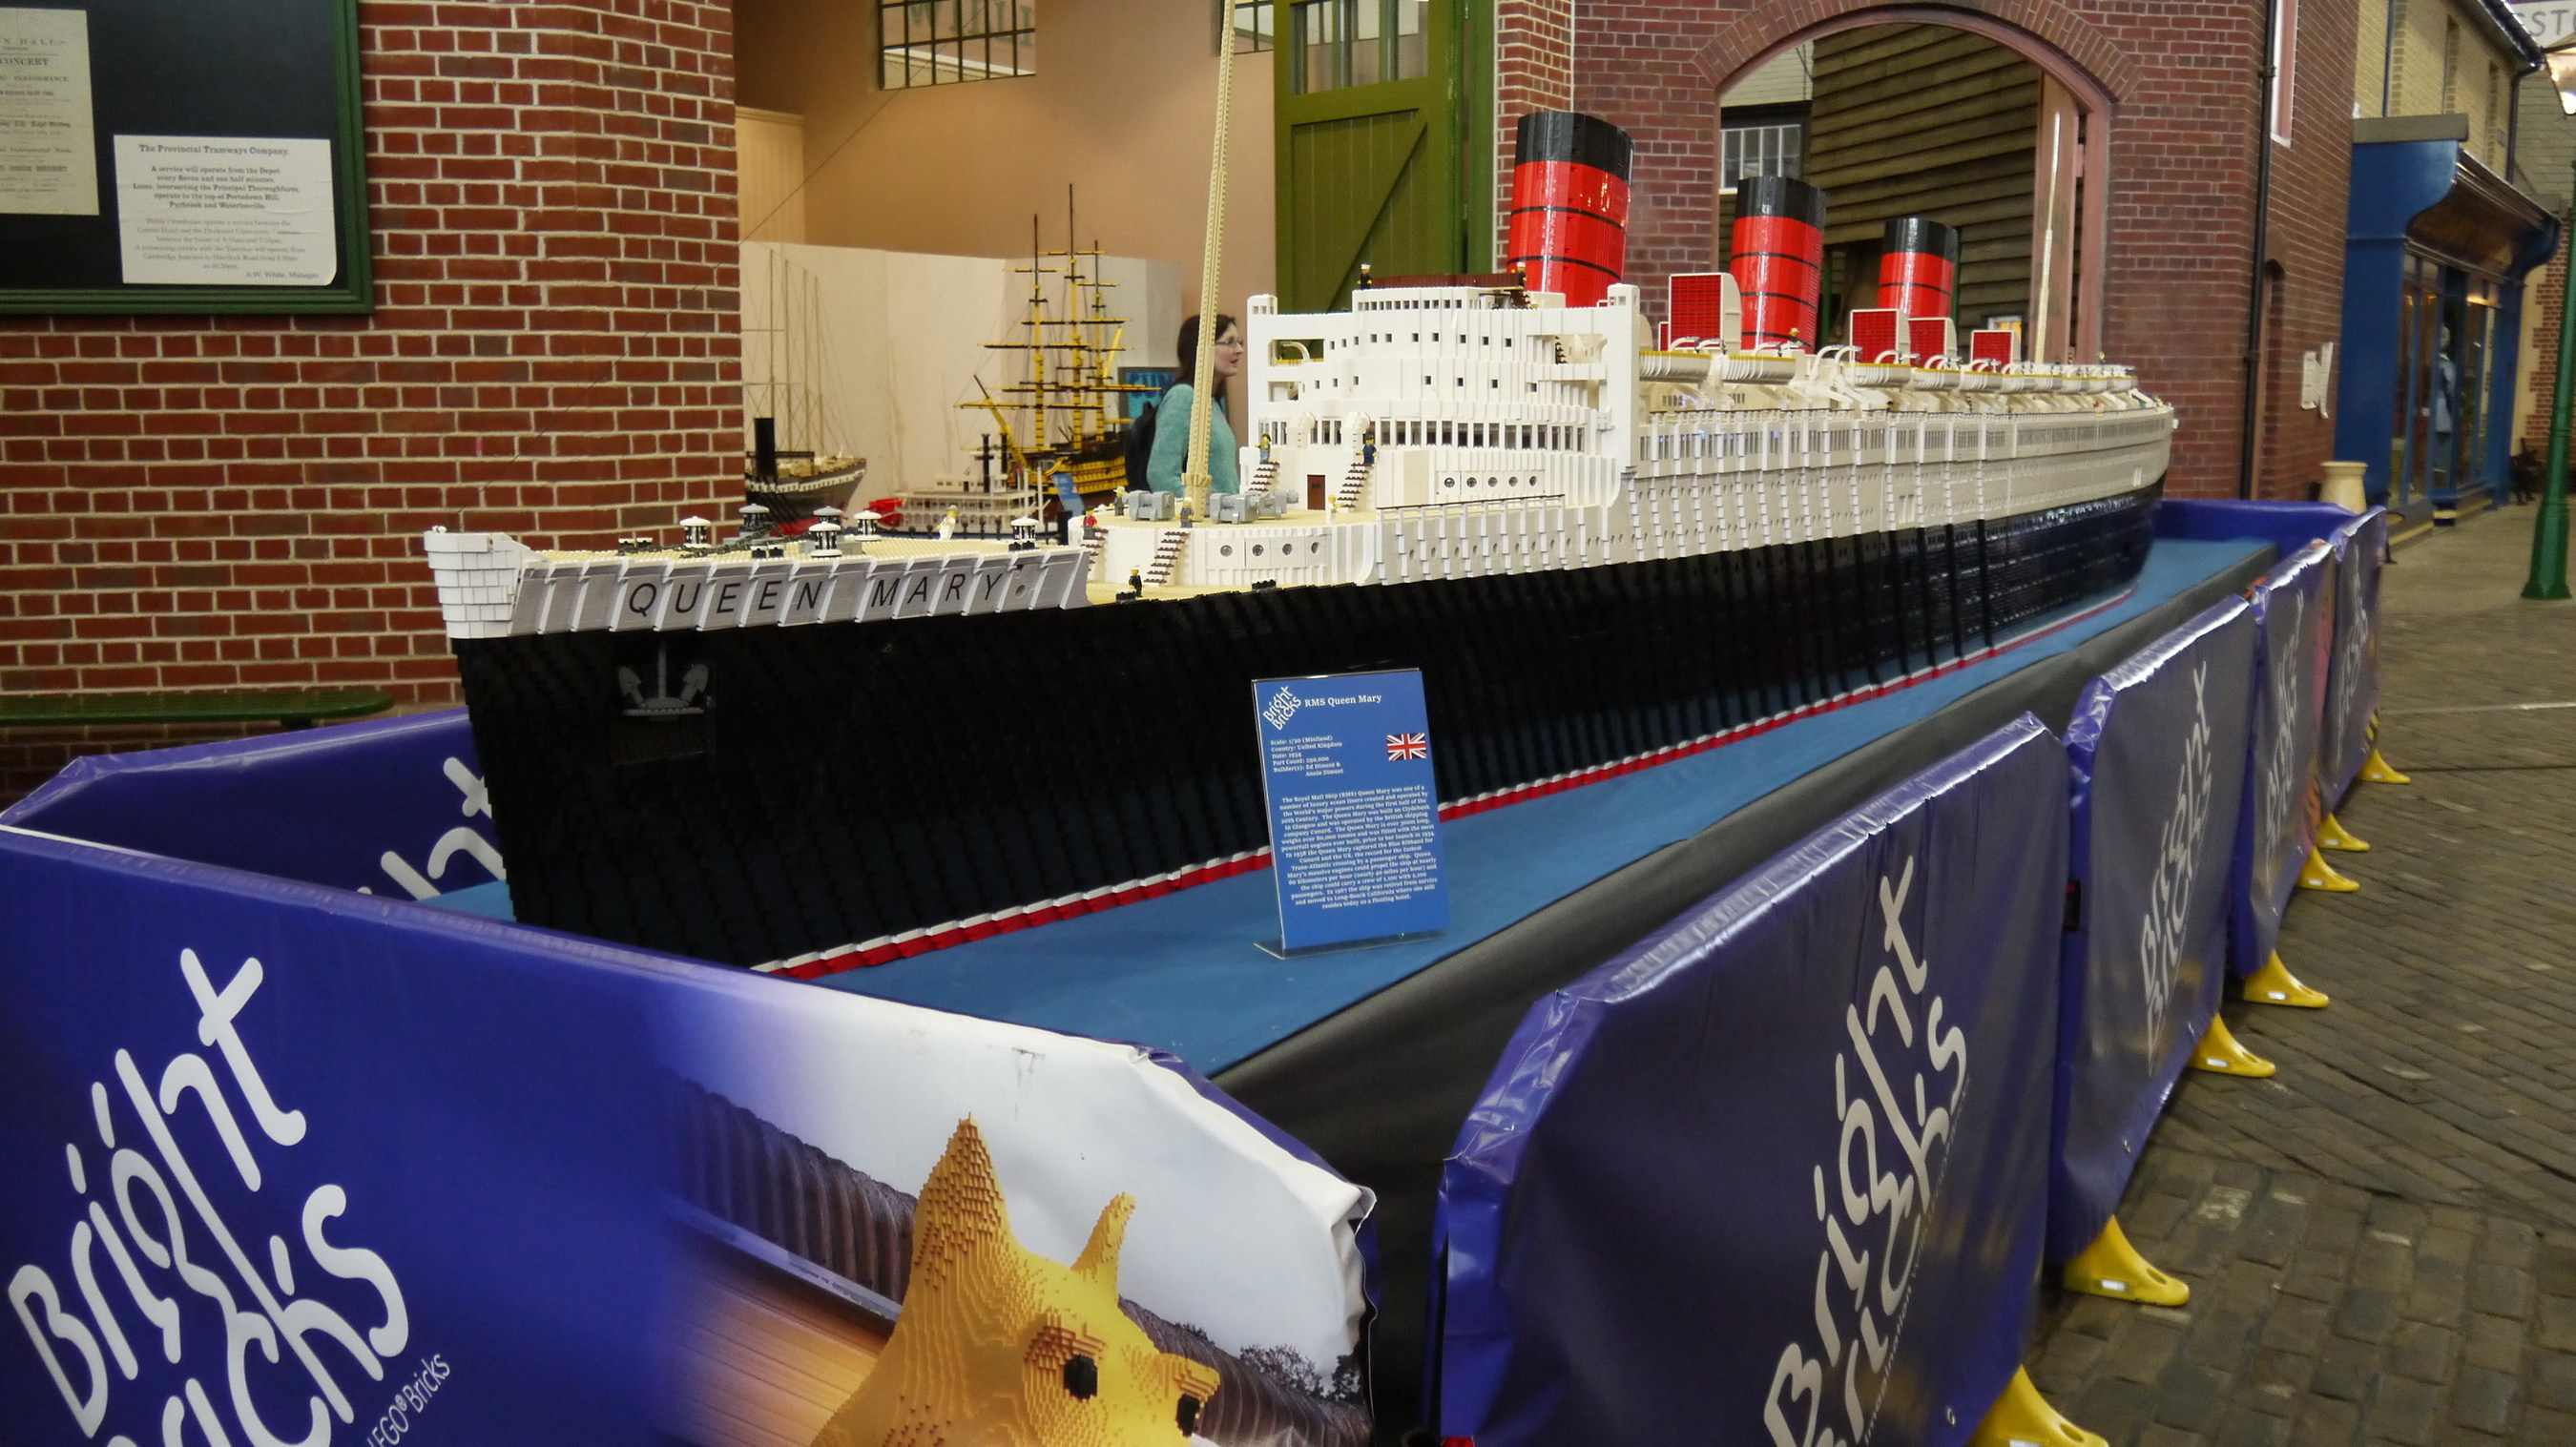 WORLD'S LARGEST LEGO(C) BRICK MODEL SHIP COMES TO THE QUEEN MARY IN LONG BEACH